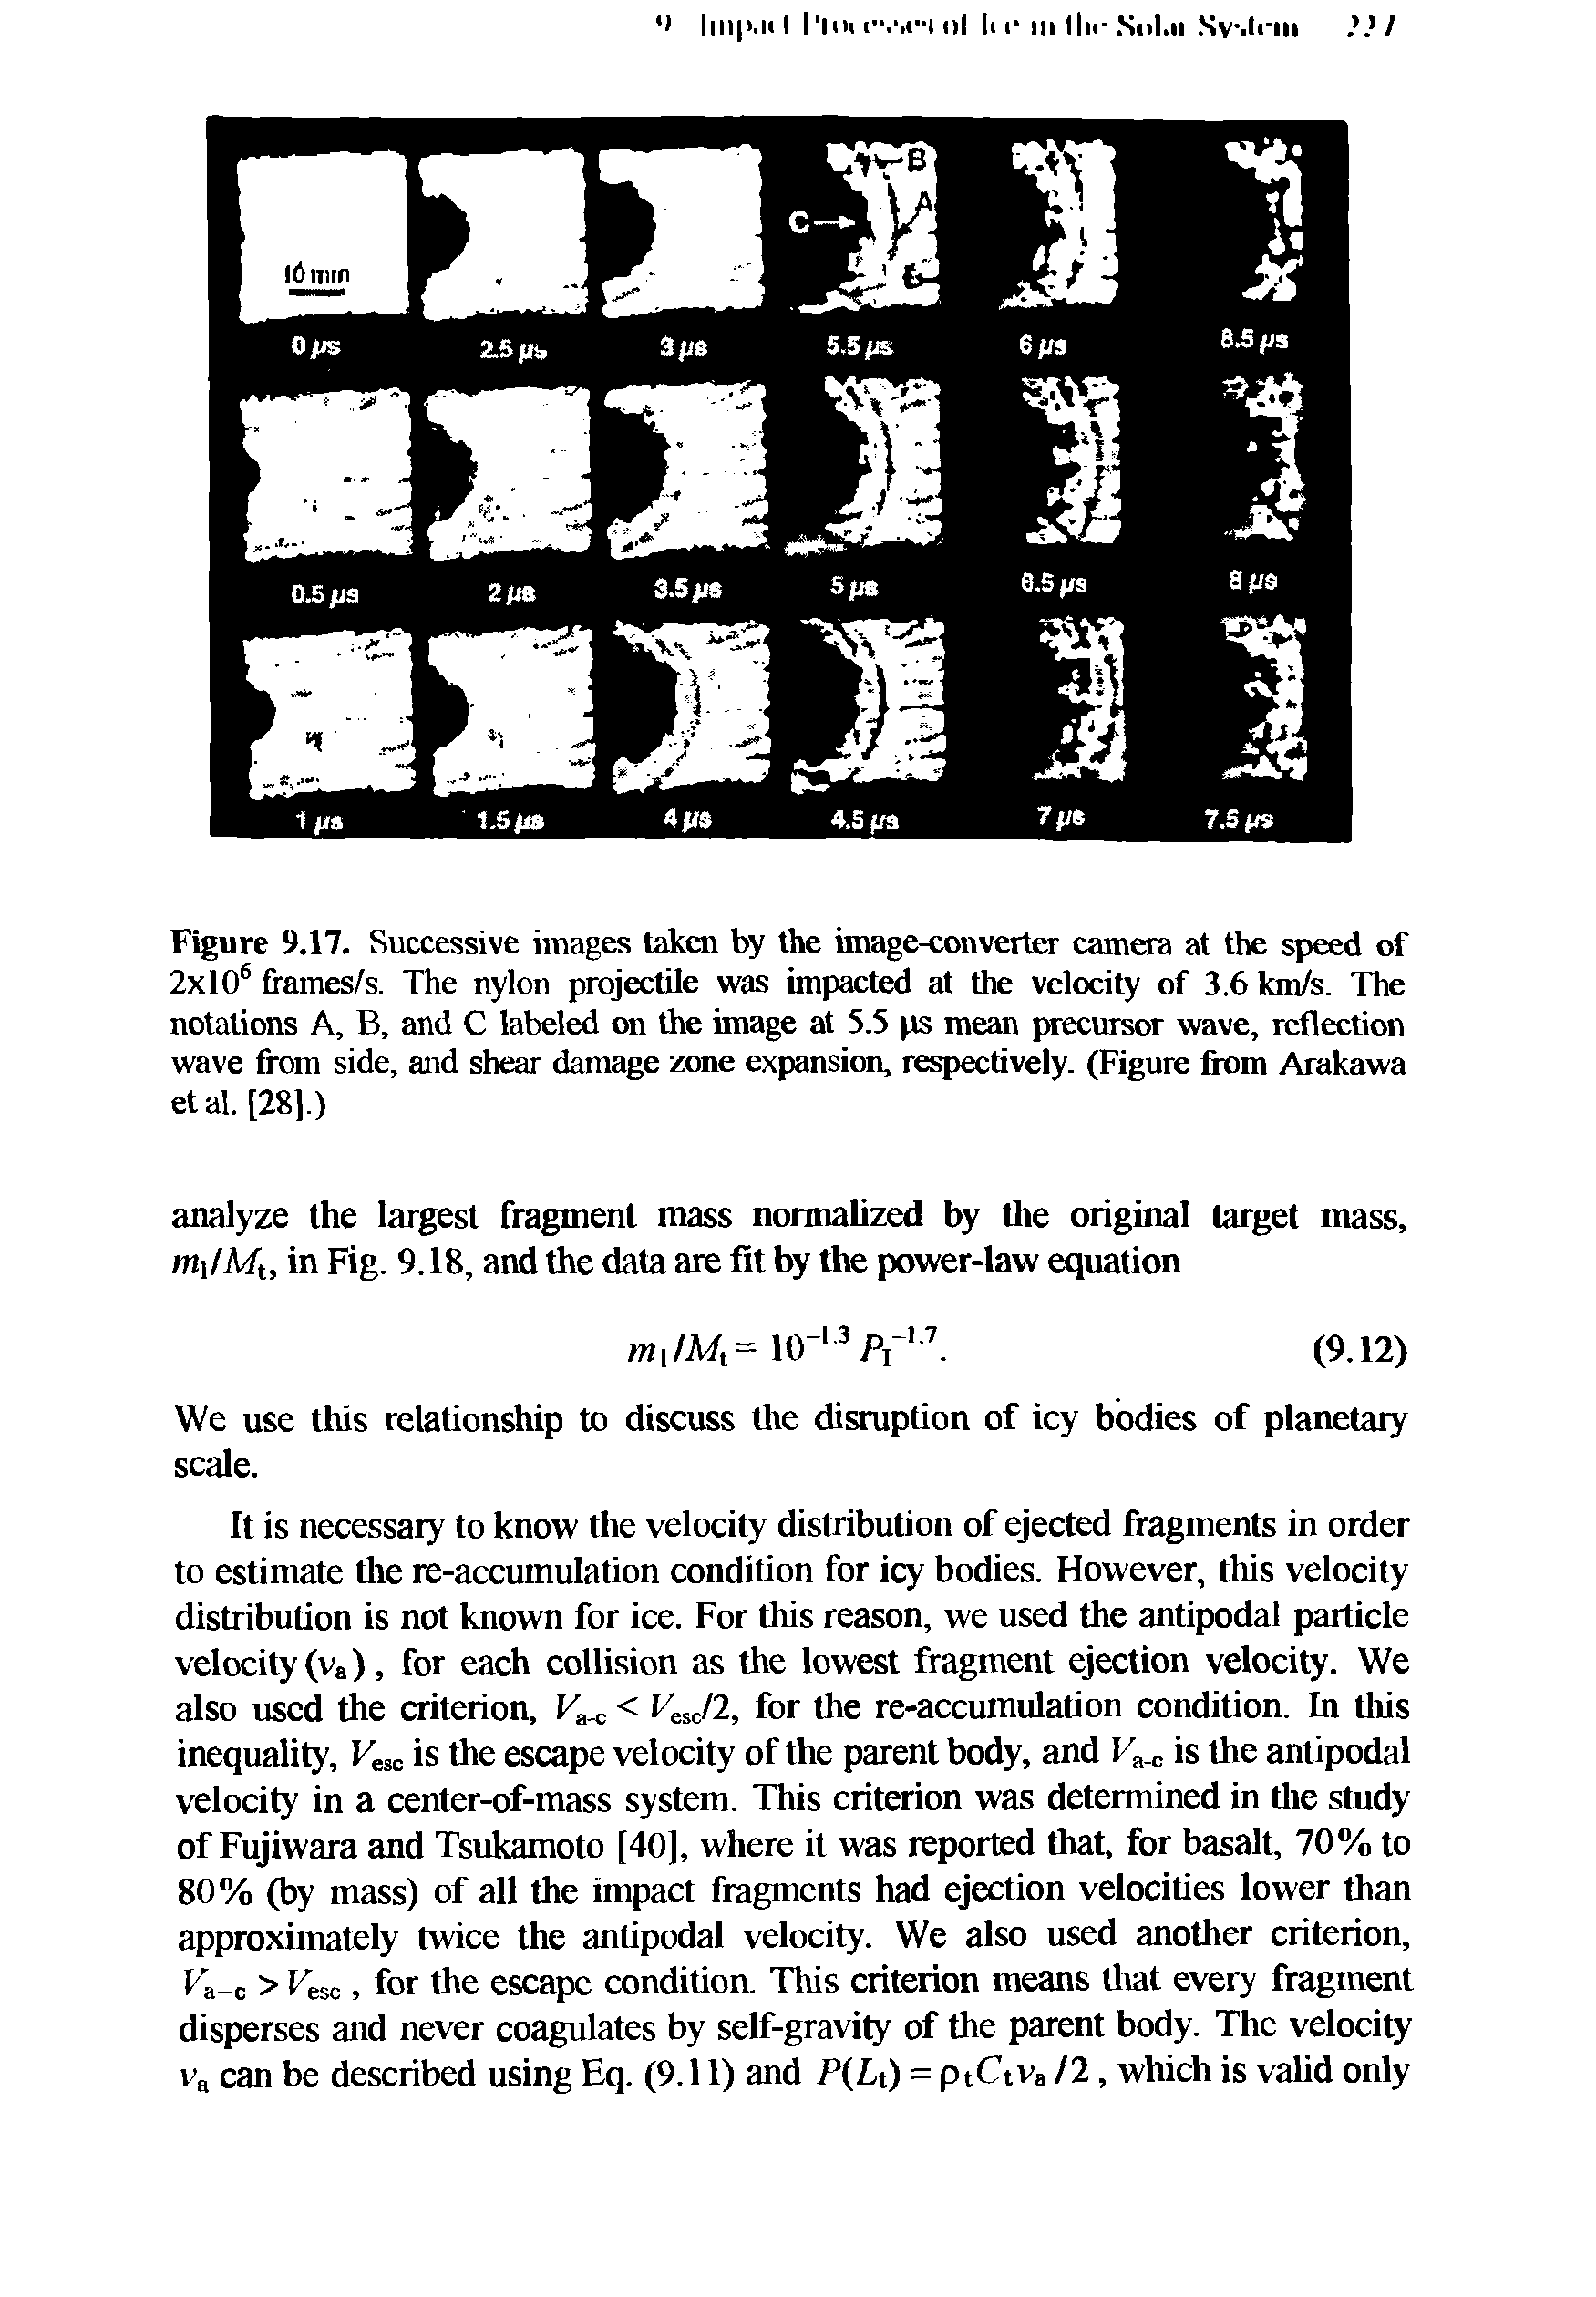 Figure 9.17. Successive images taken by the image-converter camera at the speed of 2x10 frames/s. The nylon projectile was impacted at the velocity of 3.6 km/s. The notations A, B, and C labeled on the image at 5.5 ps mean precursor wave, reflection wave from side, and shear damage zone expansion, respectively. (Figure from Arakawa etal. [28].)...